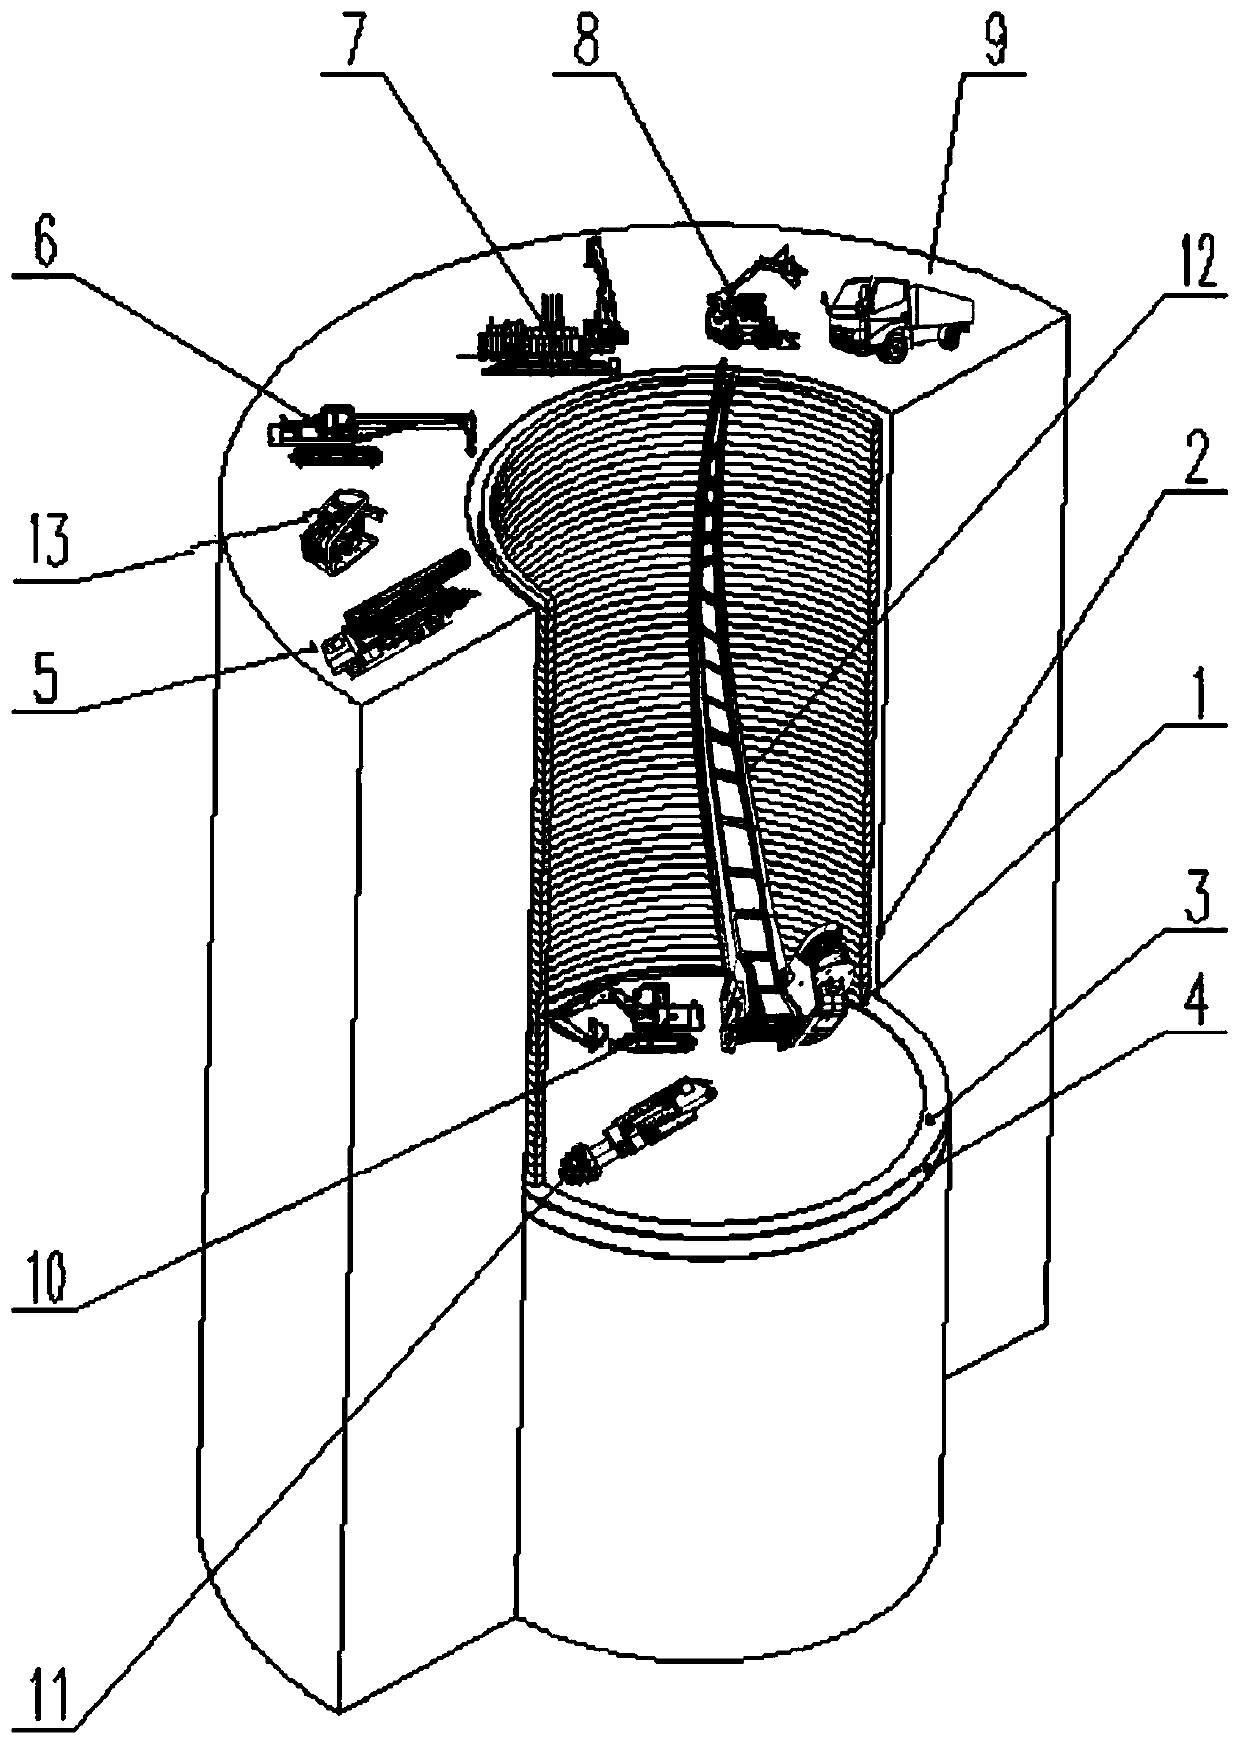 A Simple Shield Tunneling Device and Shield Tunneling Method for Super Large Diameter Deep Shaft